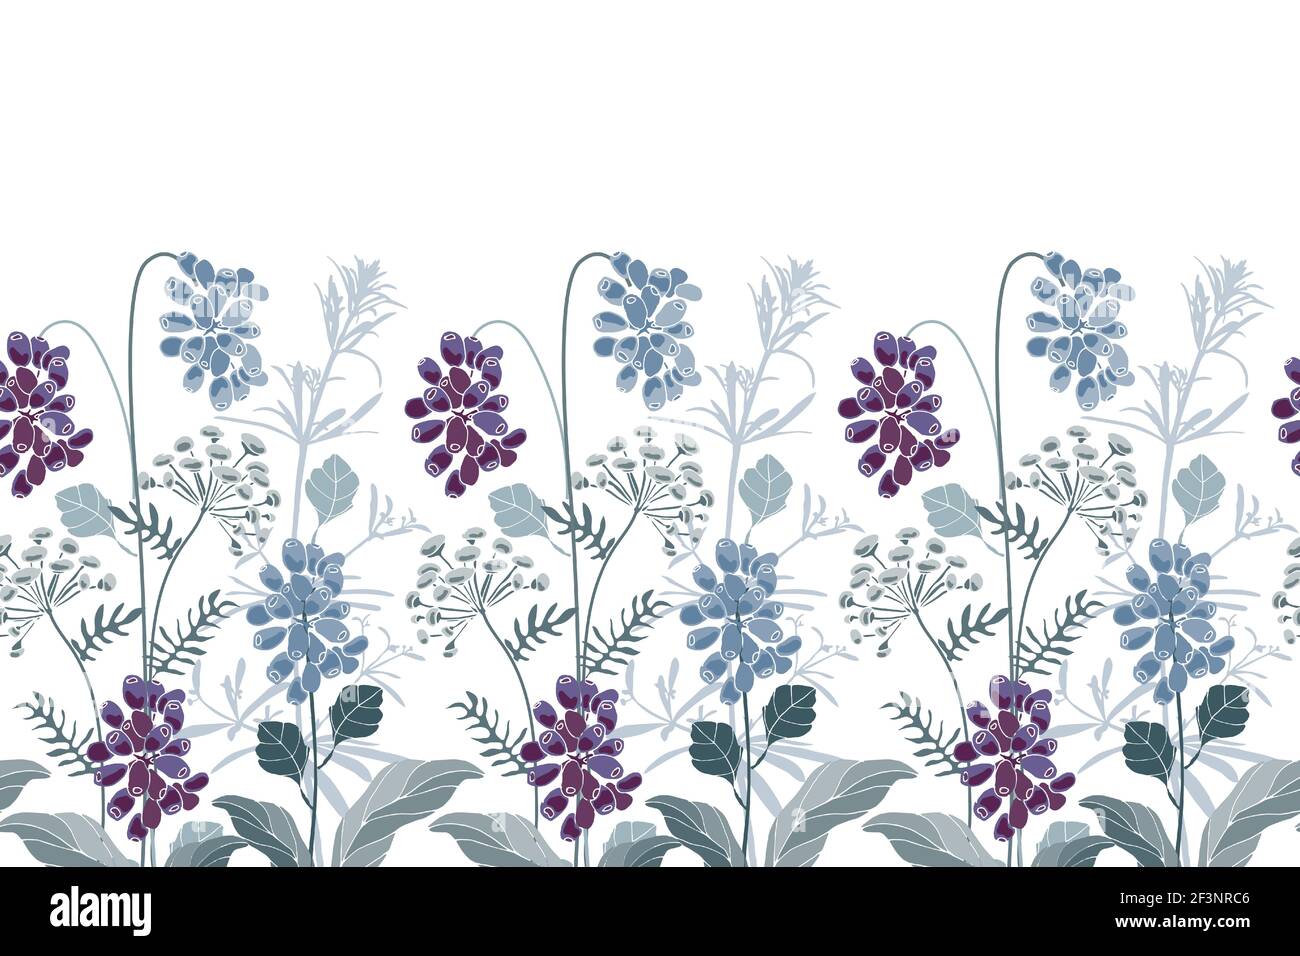 Vector floral seamless border. Blue, purple flowers, herbs and berries. Stock Vector